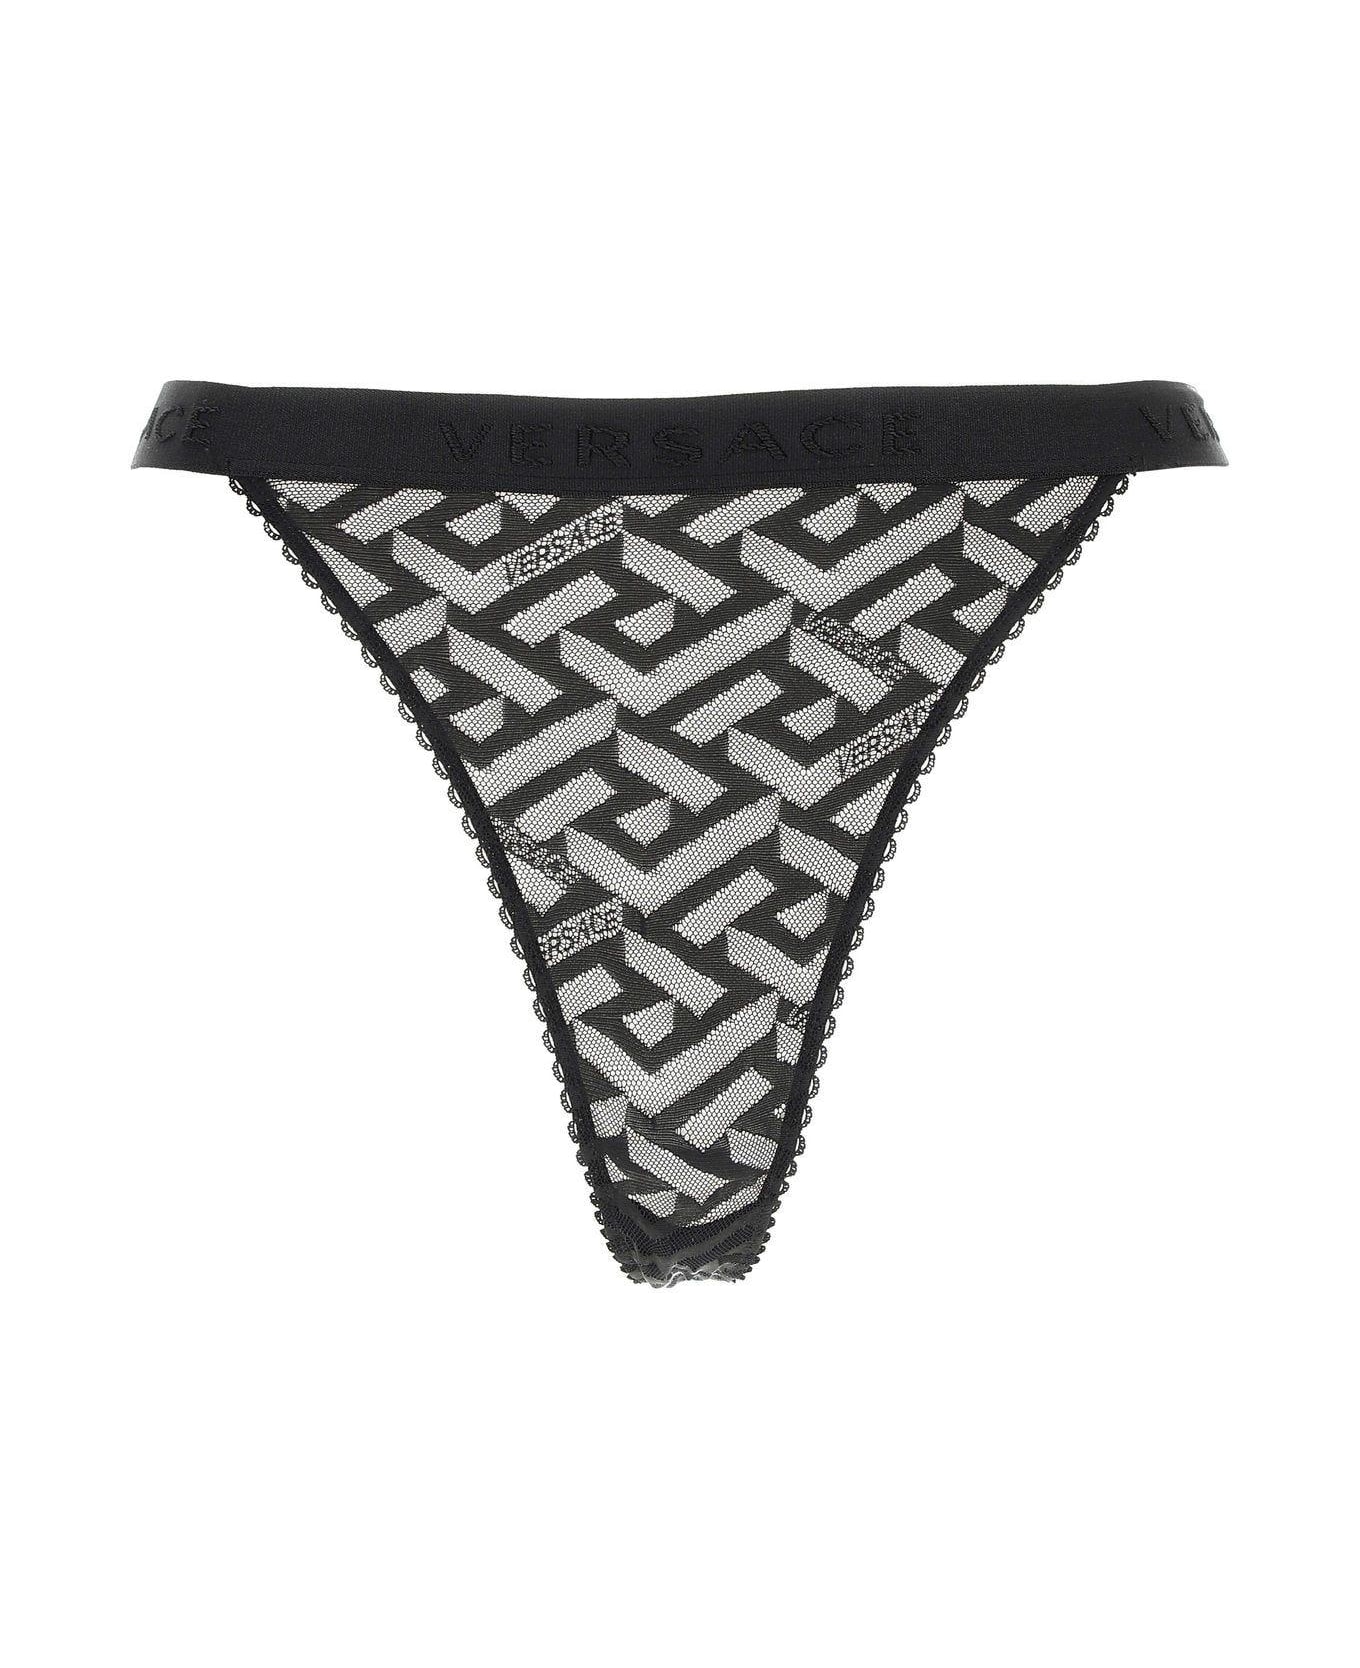 Versace Black Stretch Lace Thong